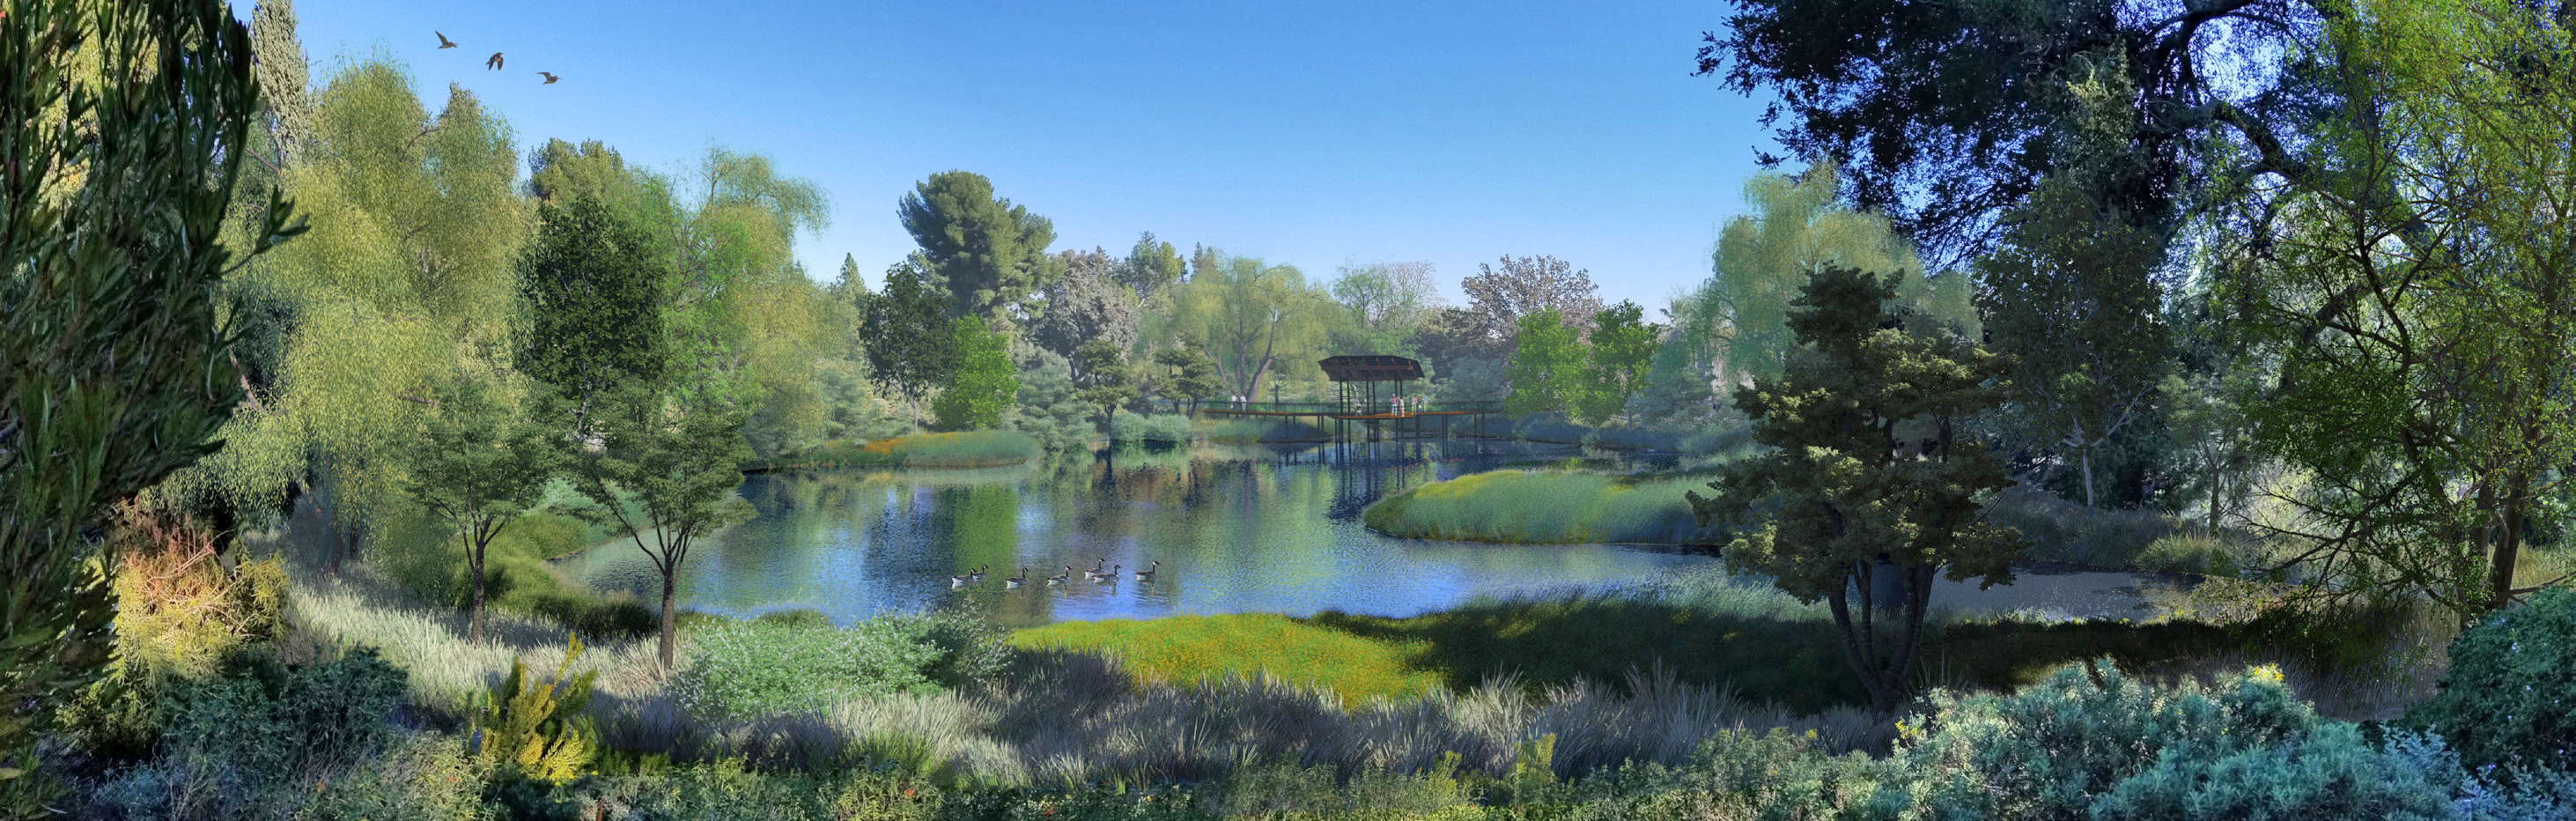 Rendering of Arboretum Waterway Flood Protection and Habitat Enhancement Project including proposed public viewing area.